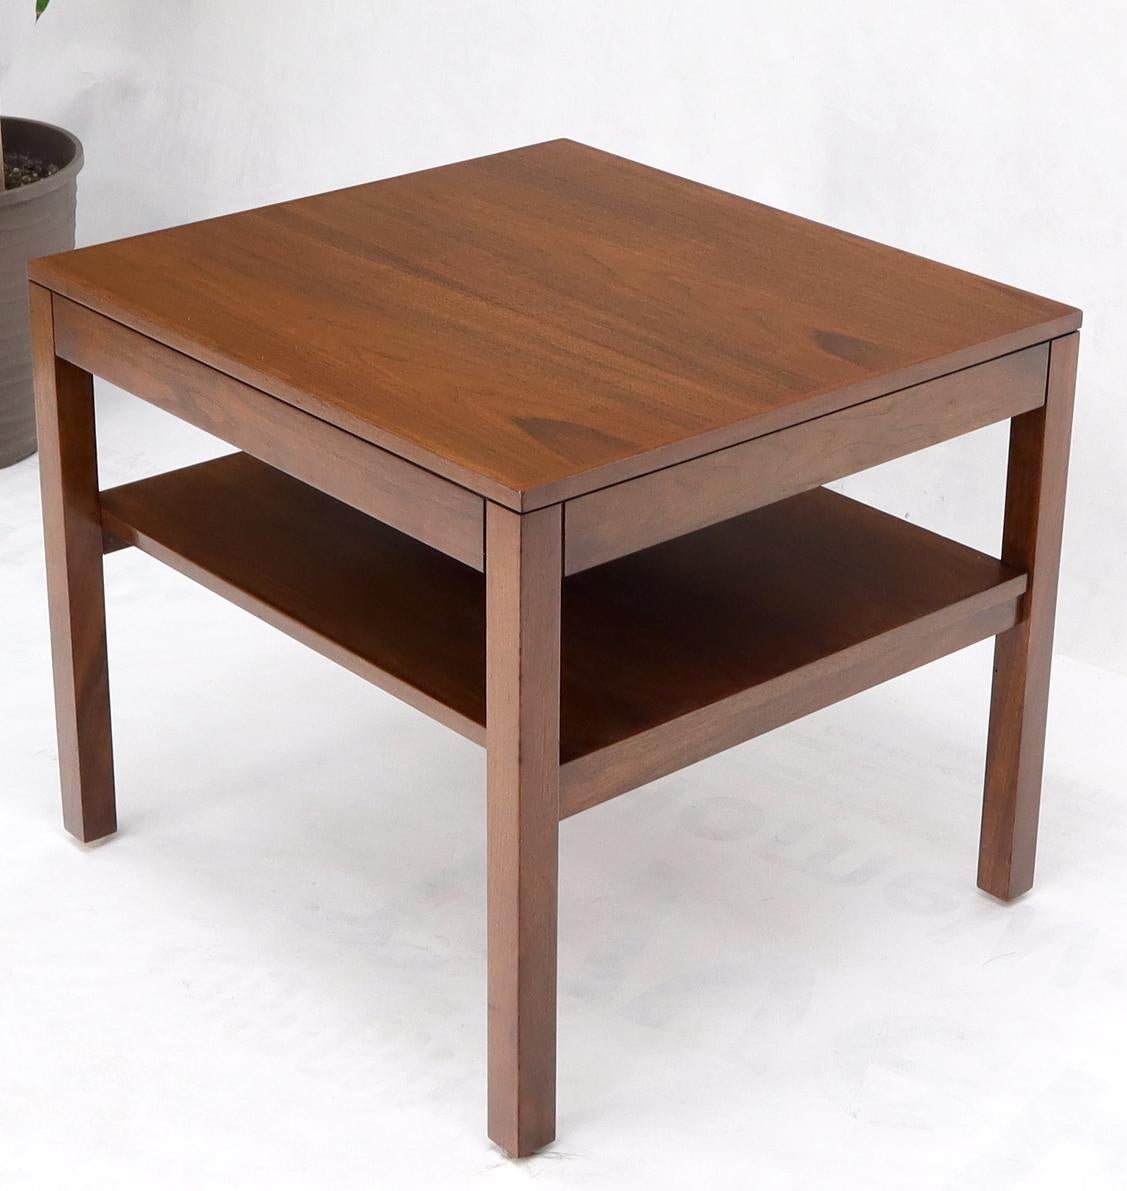 Mid-Century Modern walnut rectangle side end table in style of Jens Risom or Knoll.